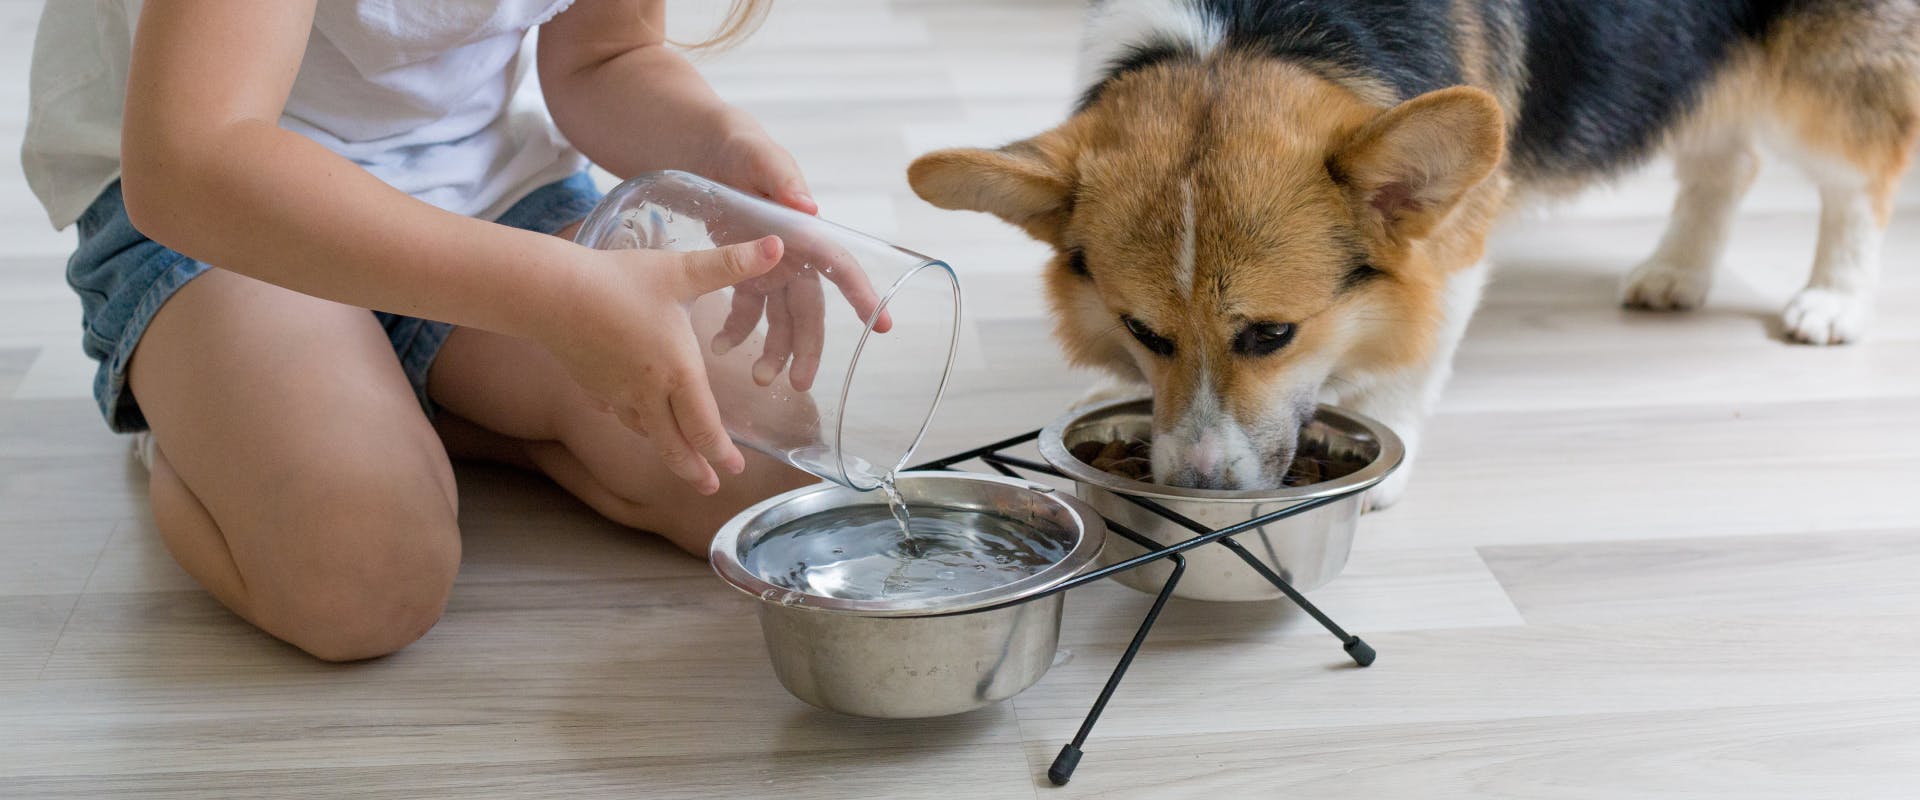 a corgi eating out of a small raised dog bowl while a person fills up its water bowl